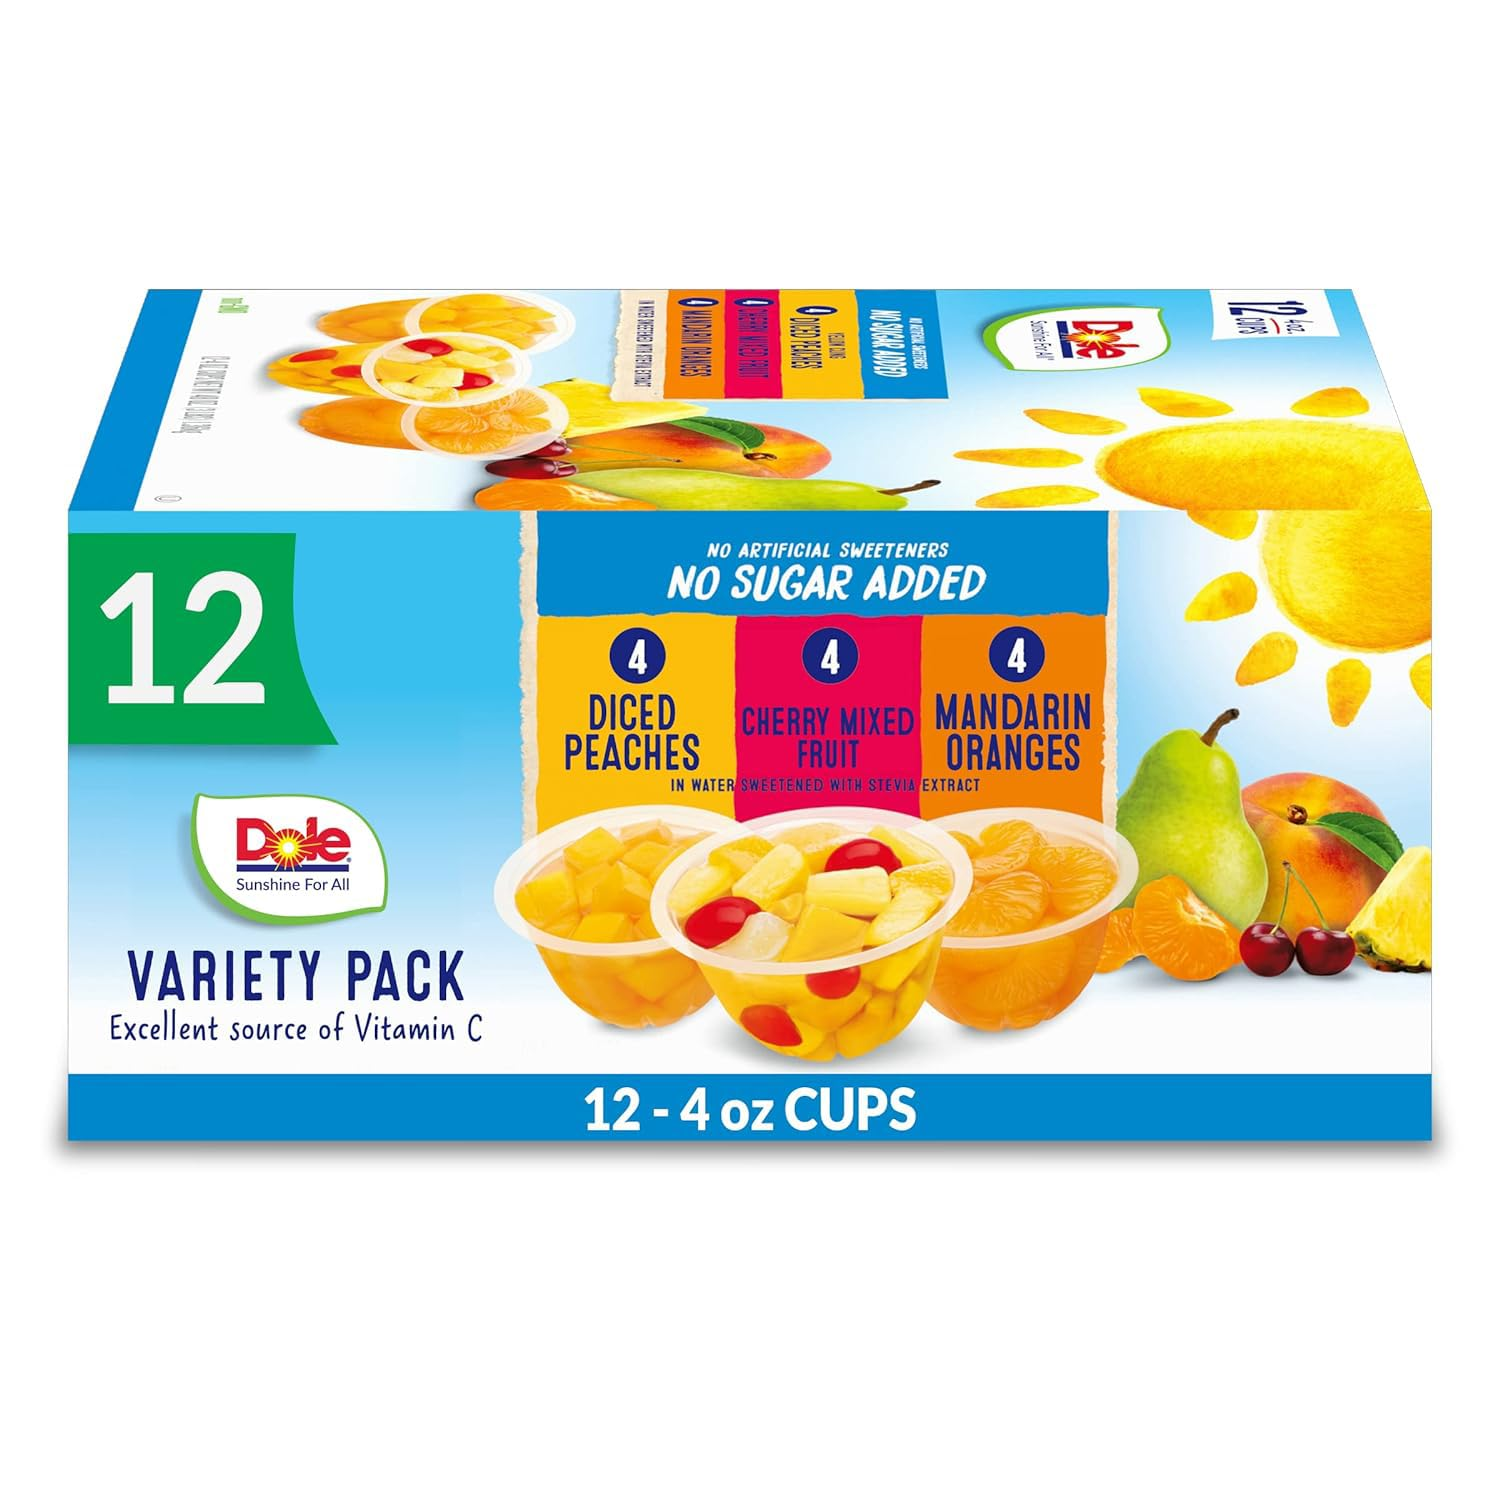 Dole Fruit Bowls No Sugar Added Variety Pack Snacks, Peaches, Mandarin Oranges & Cherry Mixed Fruit, 4oz 12 Cups, Gluten & Dairy Free, as low as $4.72